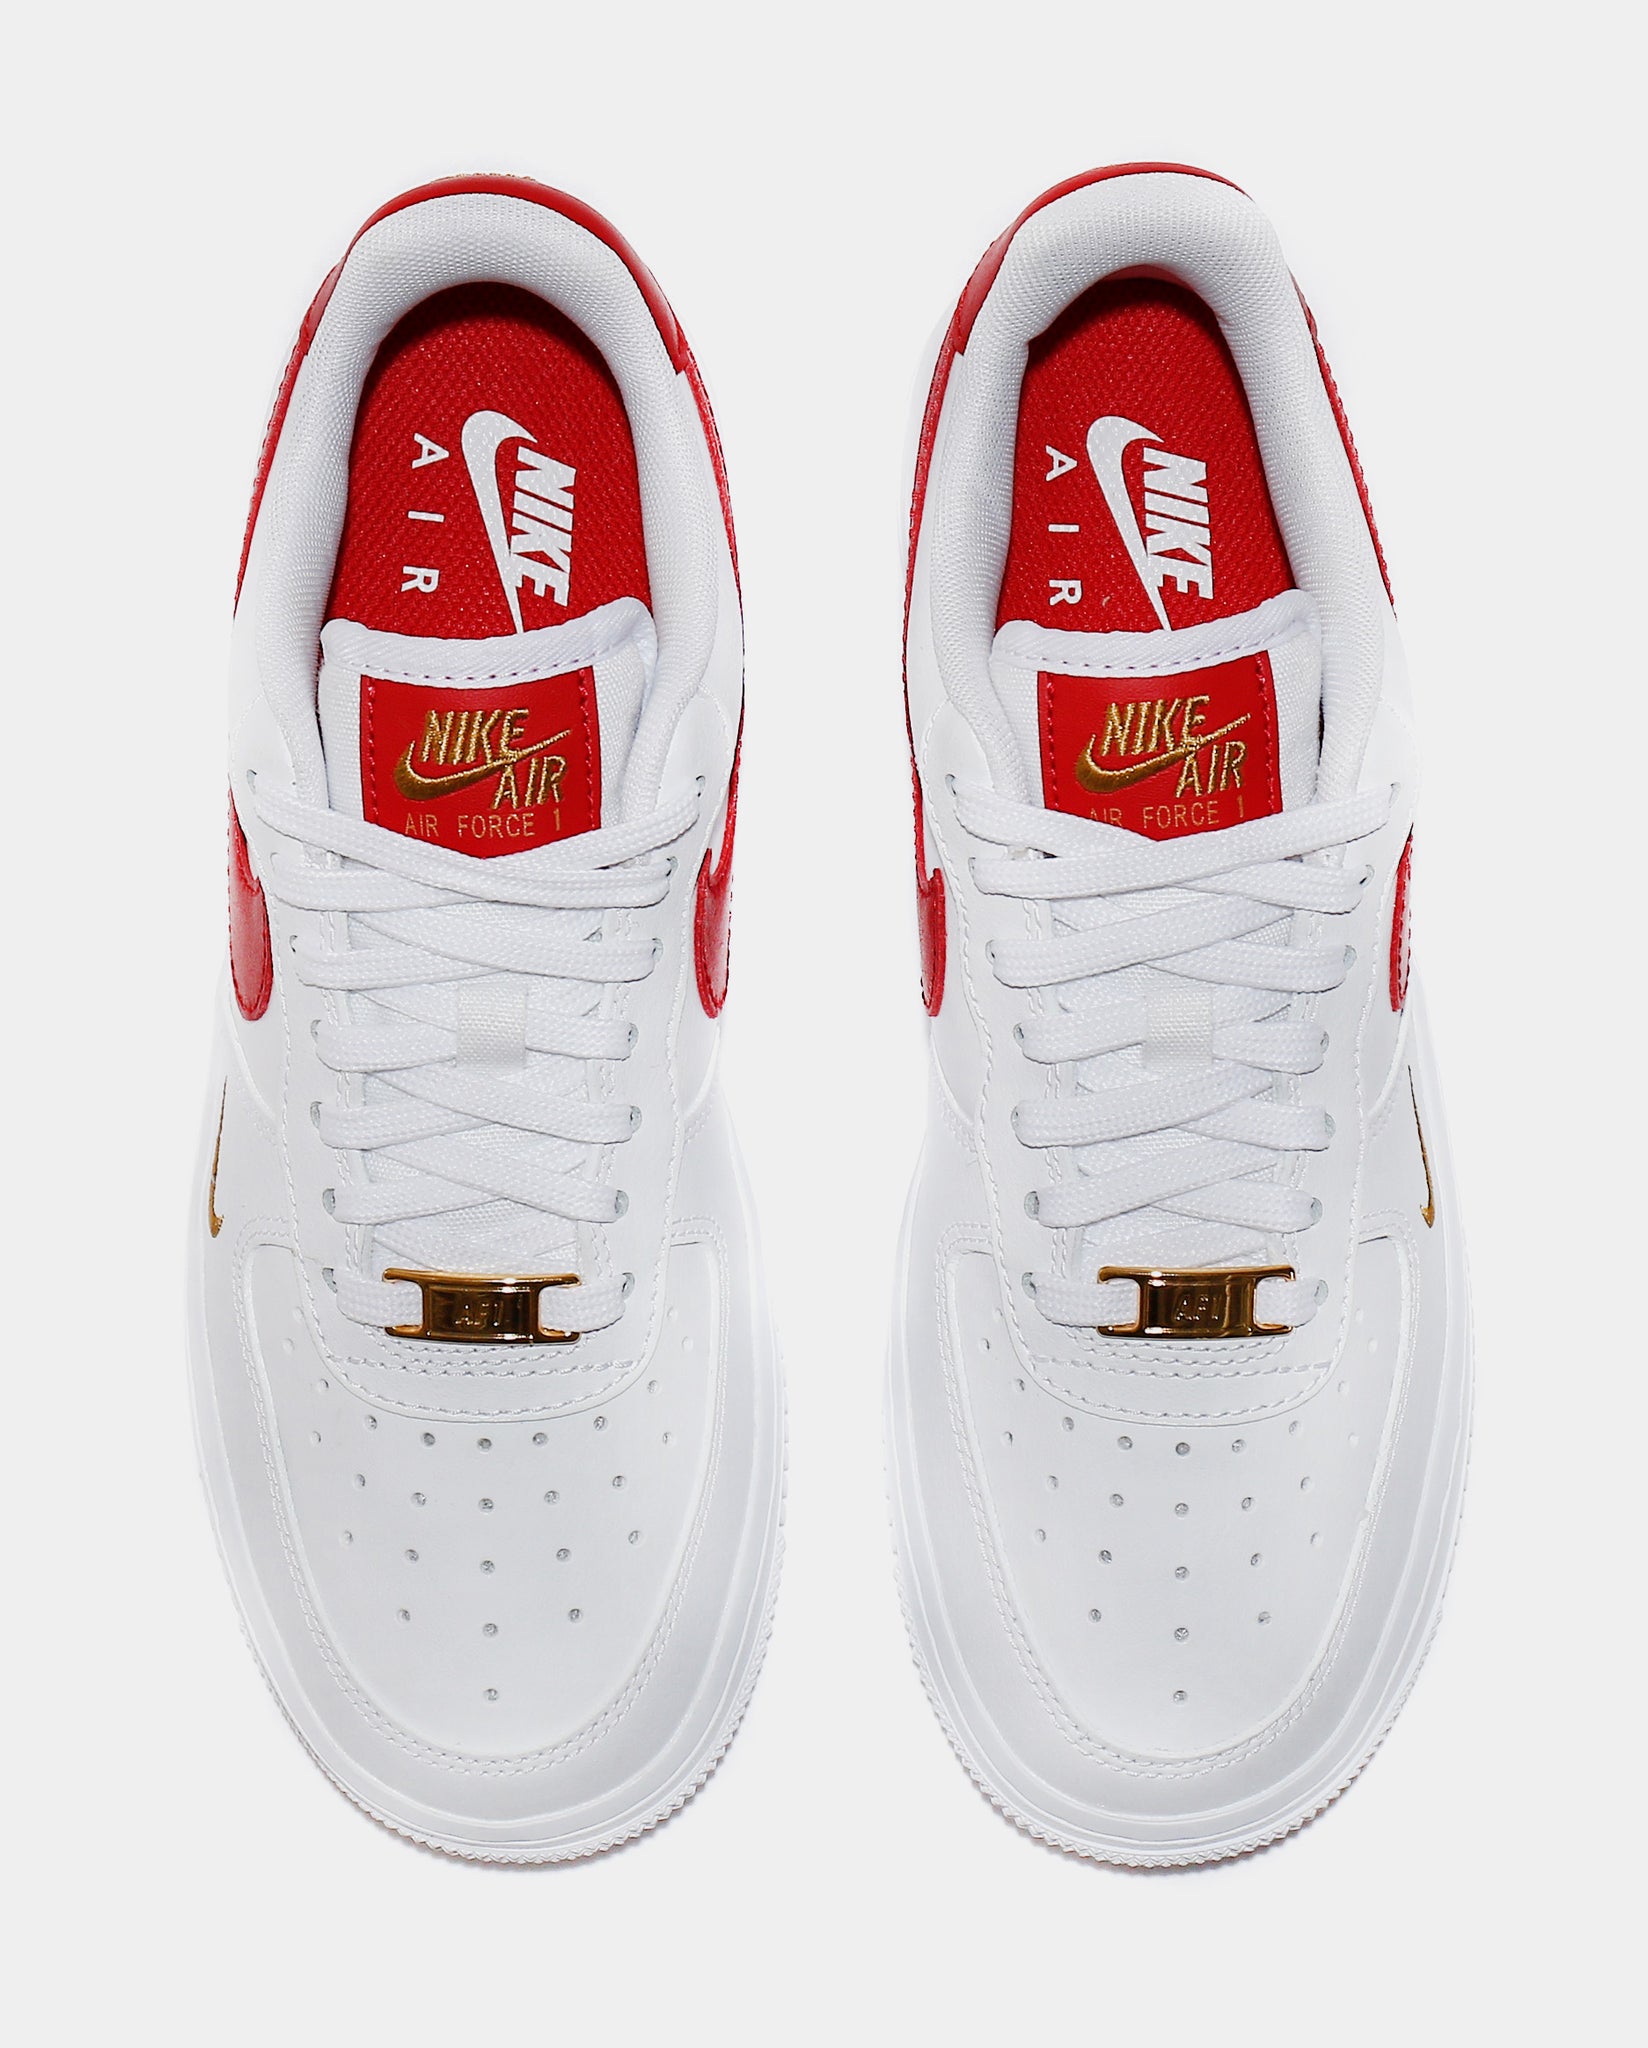 red and white air force 1 womens